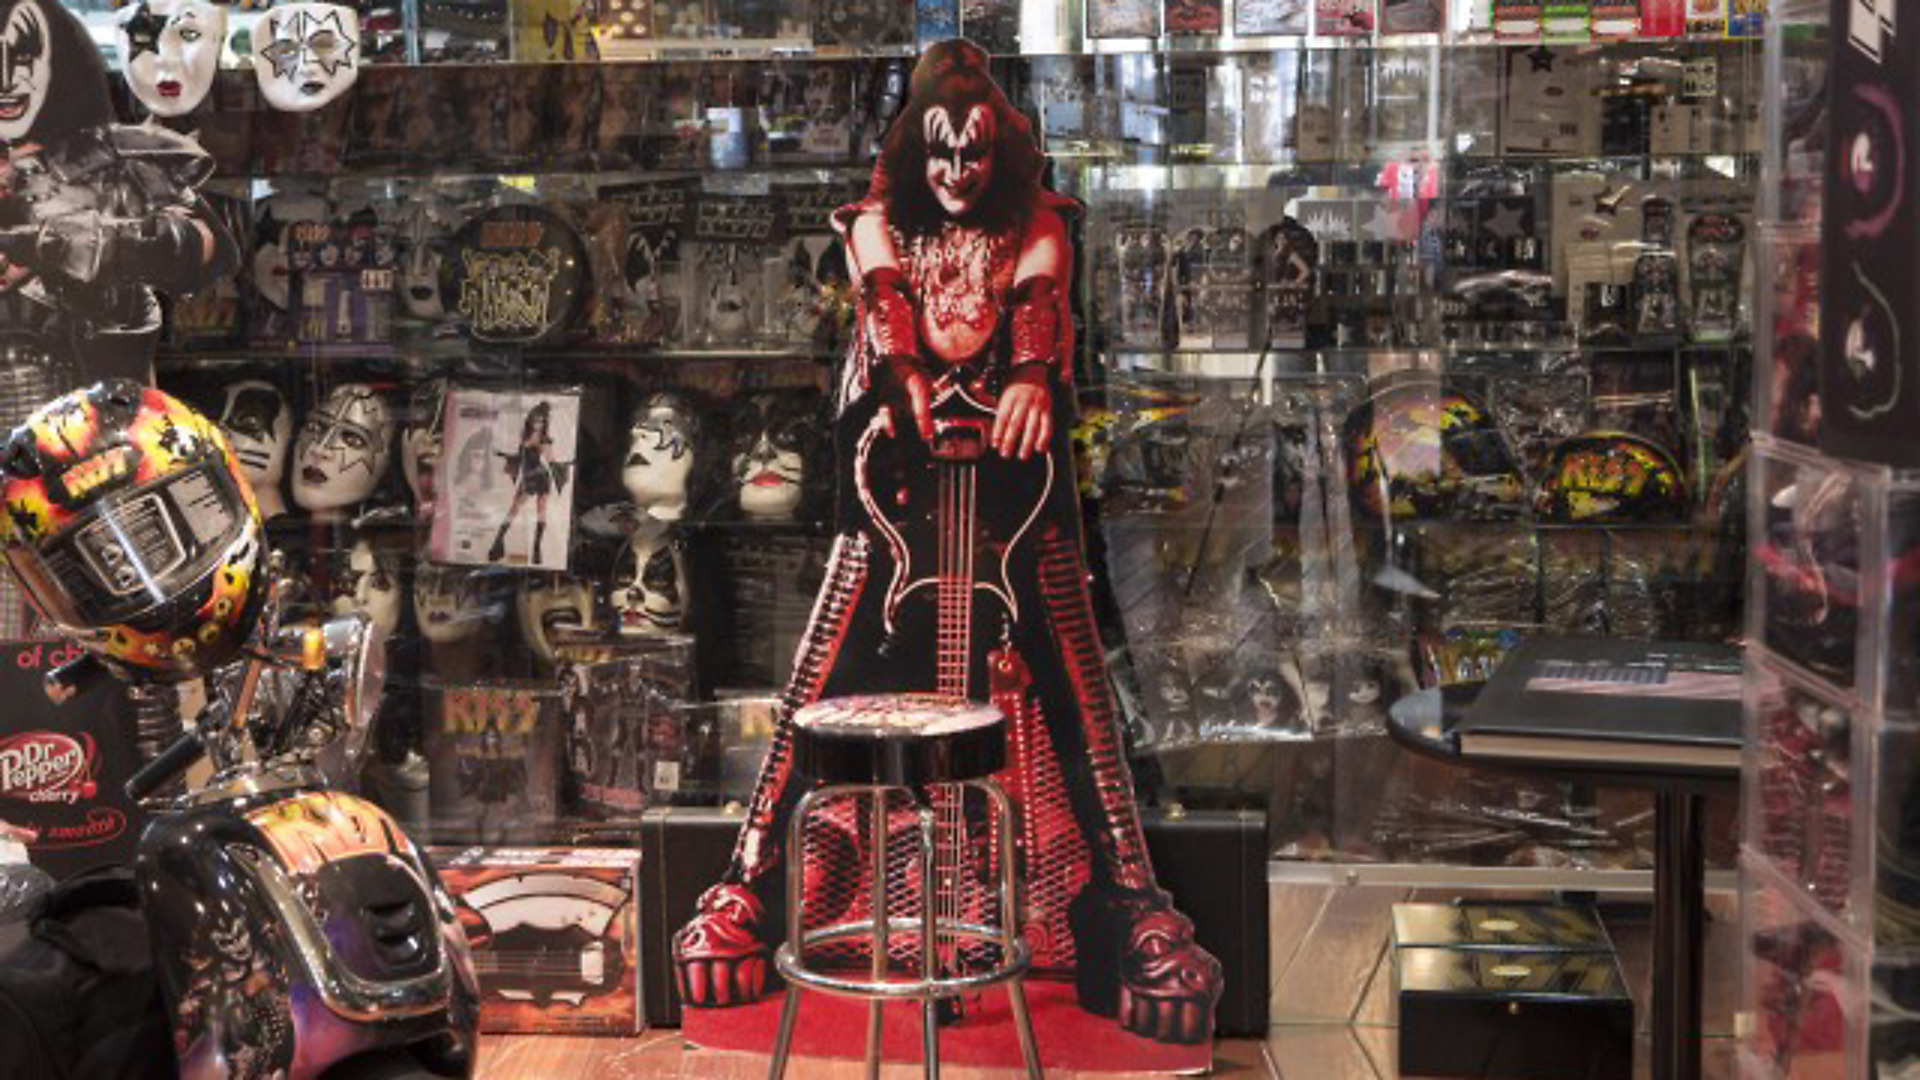 The rock band Kiss' wide reaching merchandising is on display in Gene Simmons' office in his Beverly Hills home, which he shares with his wife Shannon Tweed, as seen on HGTV Celebrities at Home. Simmons, a producer, entrepreneur and actor is the bassist and singer-songwriter of the rock band Kiss, which has sold over 100 millions albums.